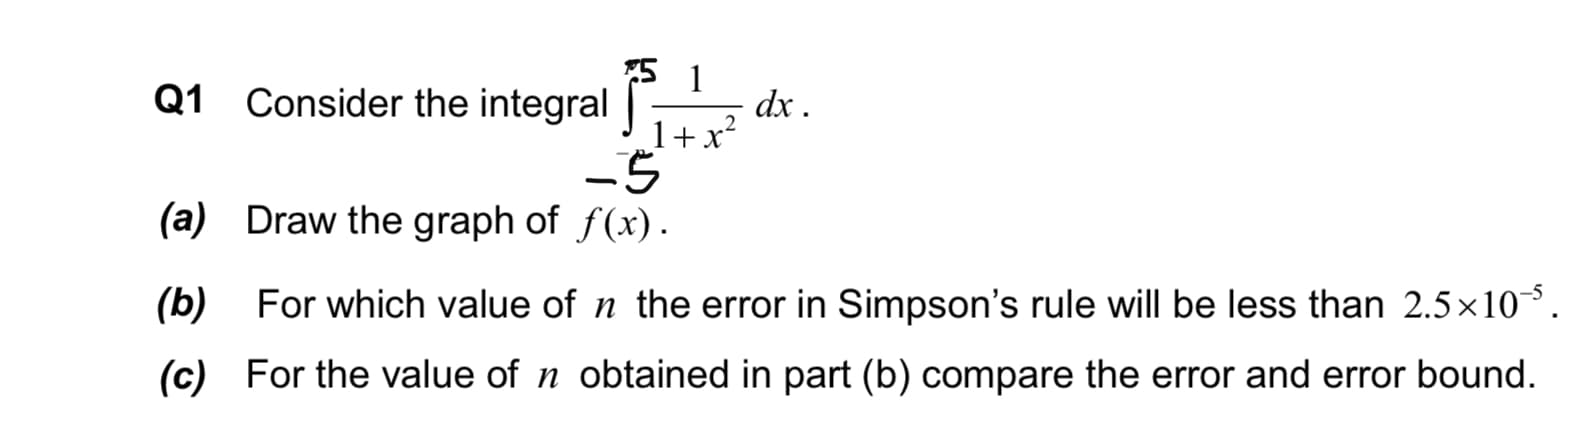 Q1 Consider the integral -
dx .
1+x?
(a) Draw the graph of f(x).
(b) For which value of n the error in Simpson's rule will be less than 2.5×10,
(c) For the value of n obtained in part (b) compare the error and error bound.
